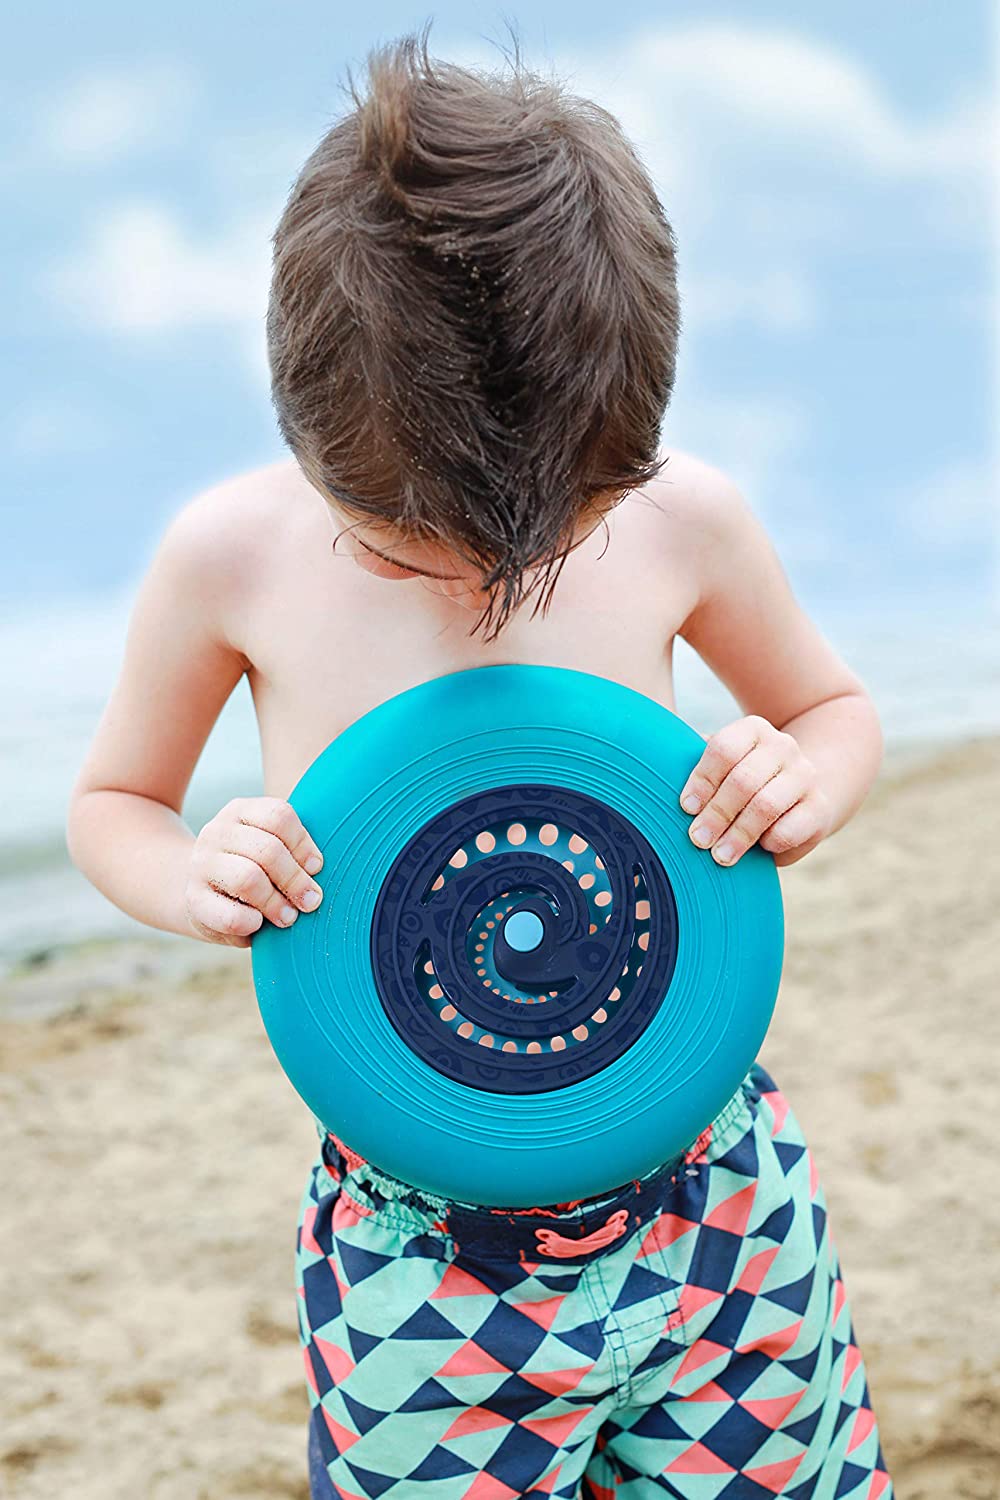 [B. Toys by Battat] 1 piece Disc-Oh! Frisbees Flying Disc